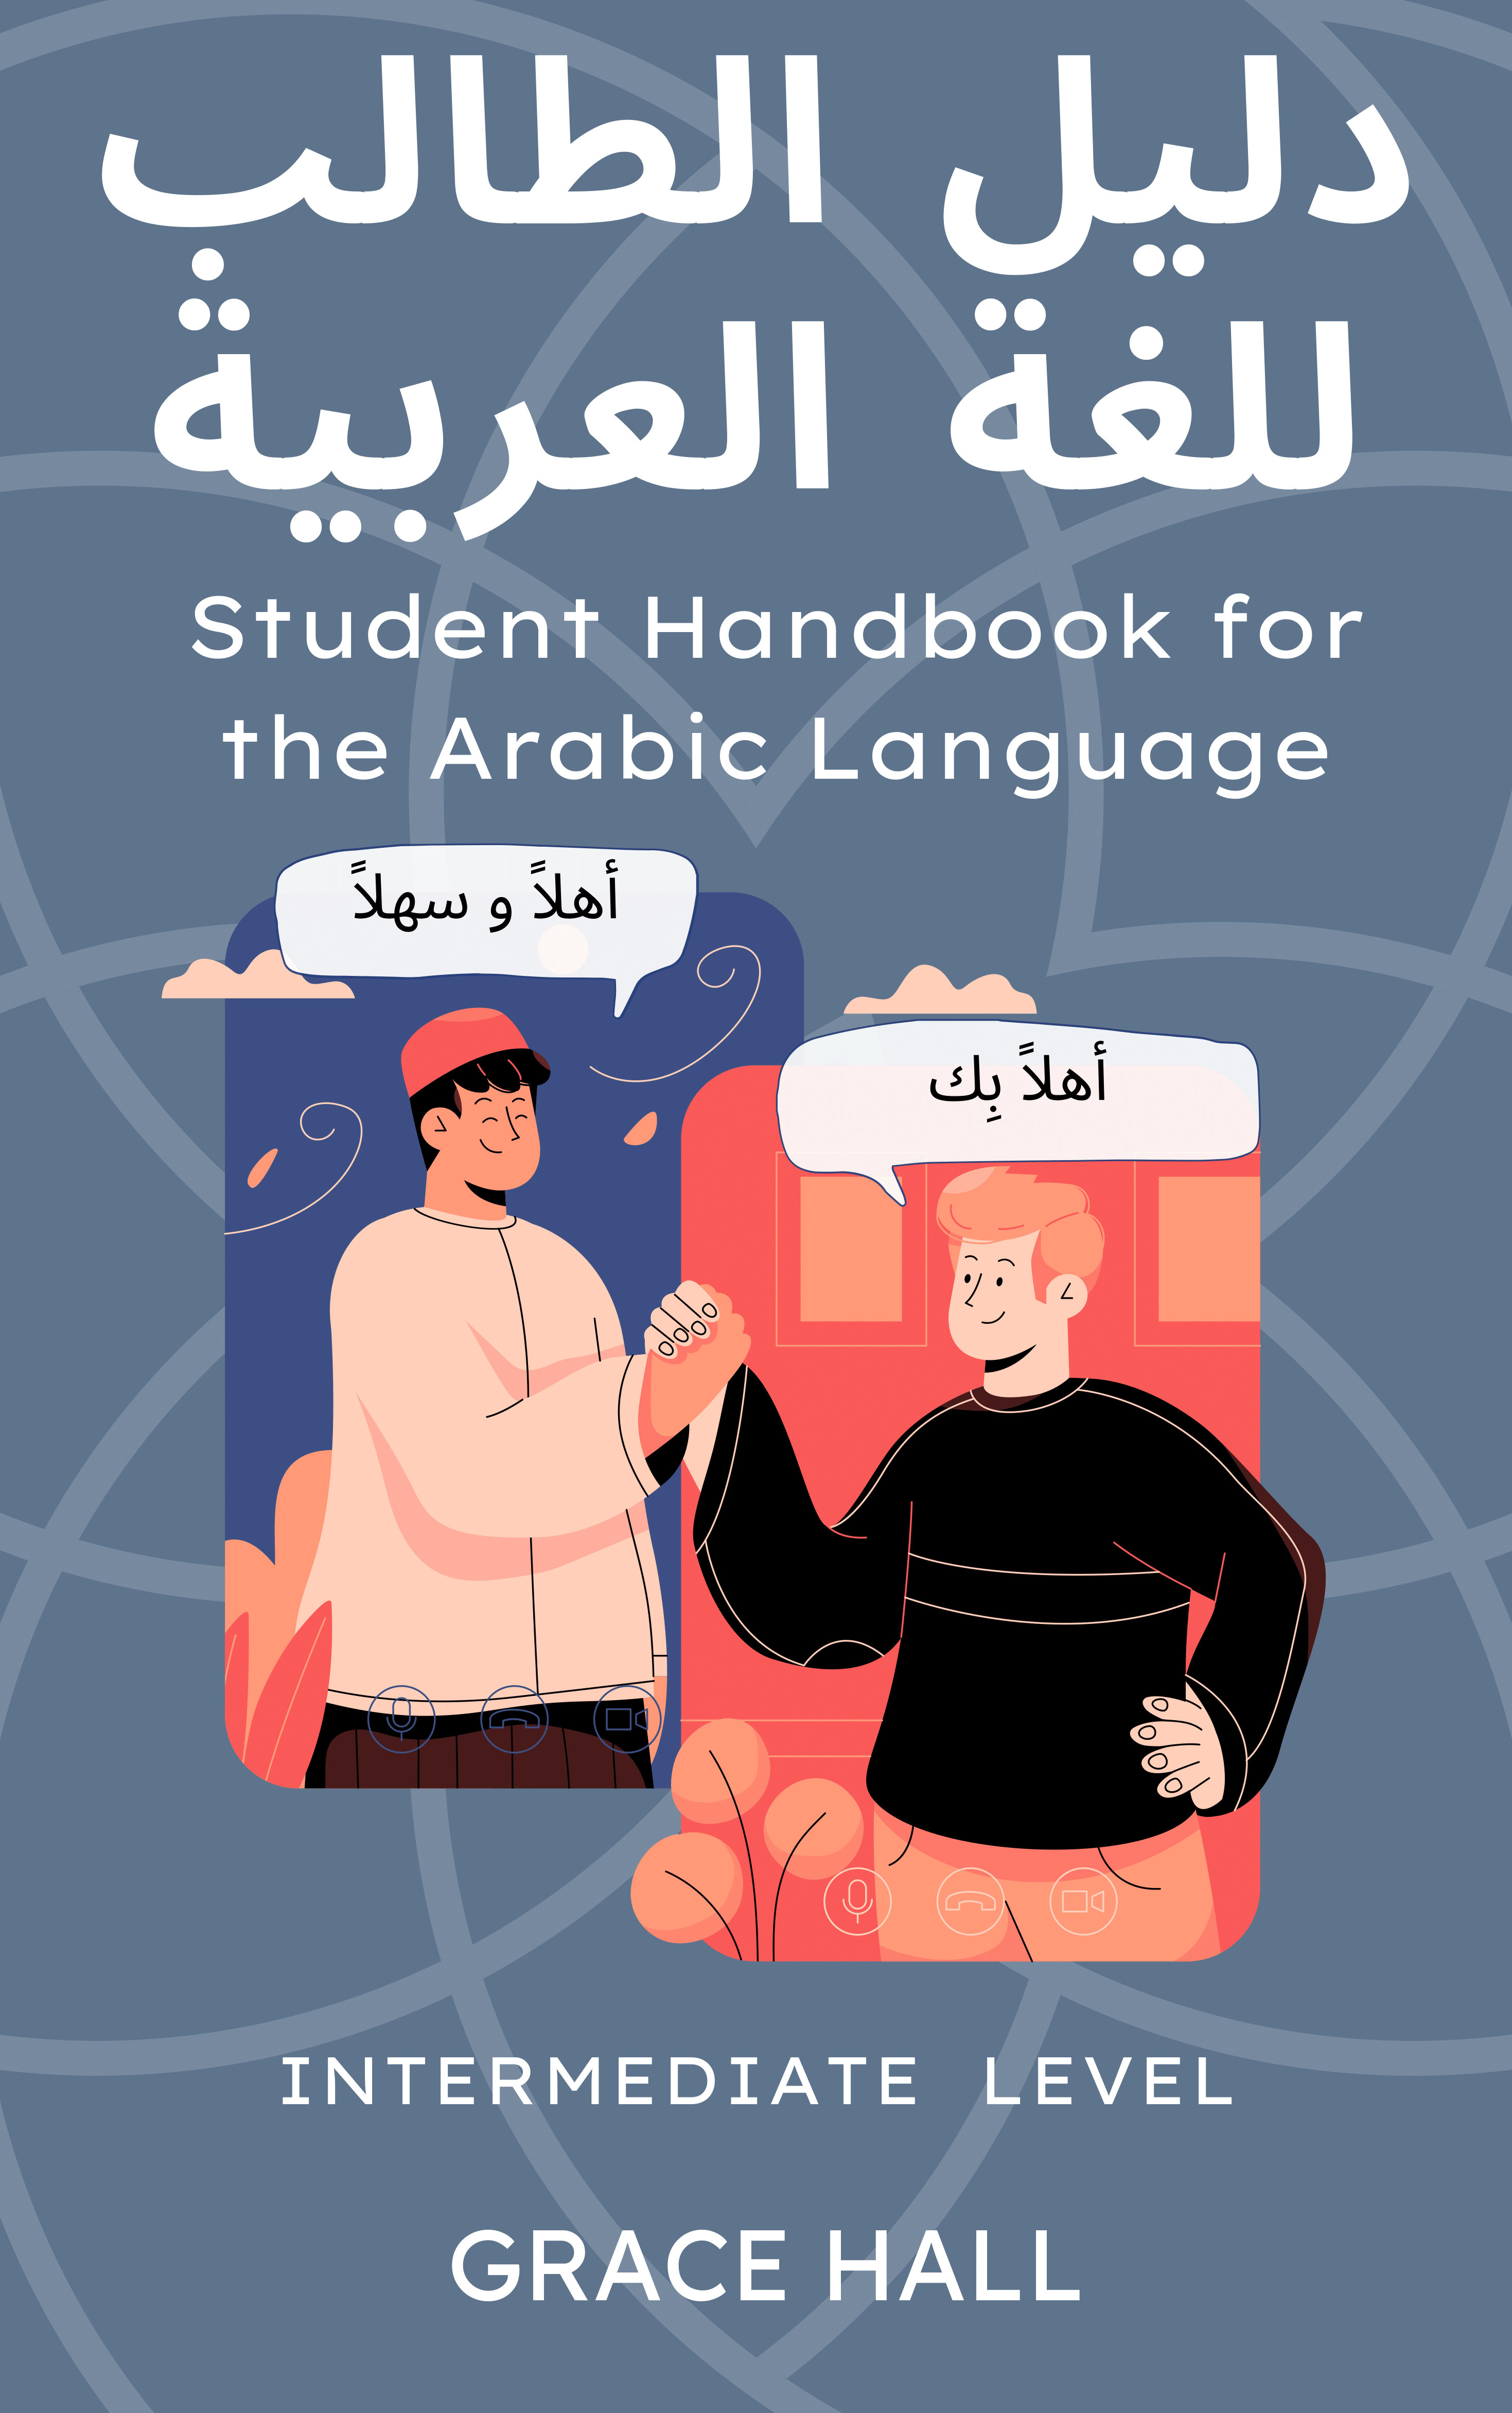 Cover image for Study Materials for Arabic Students by an Arabic Student